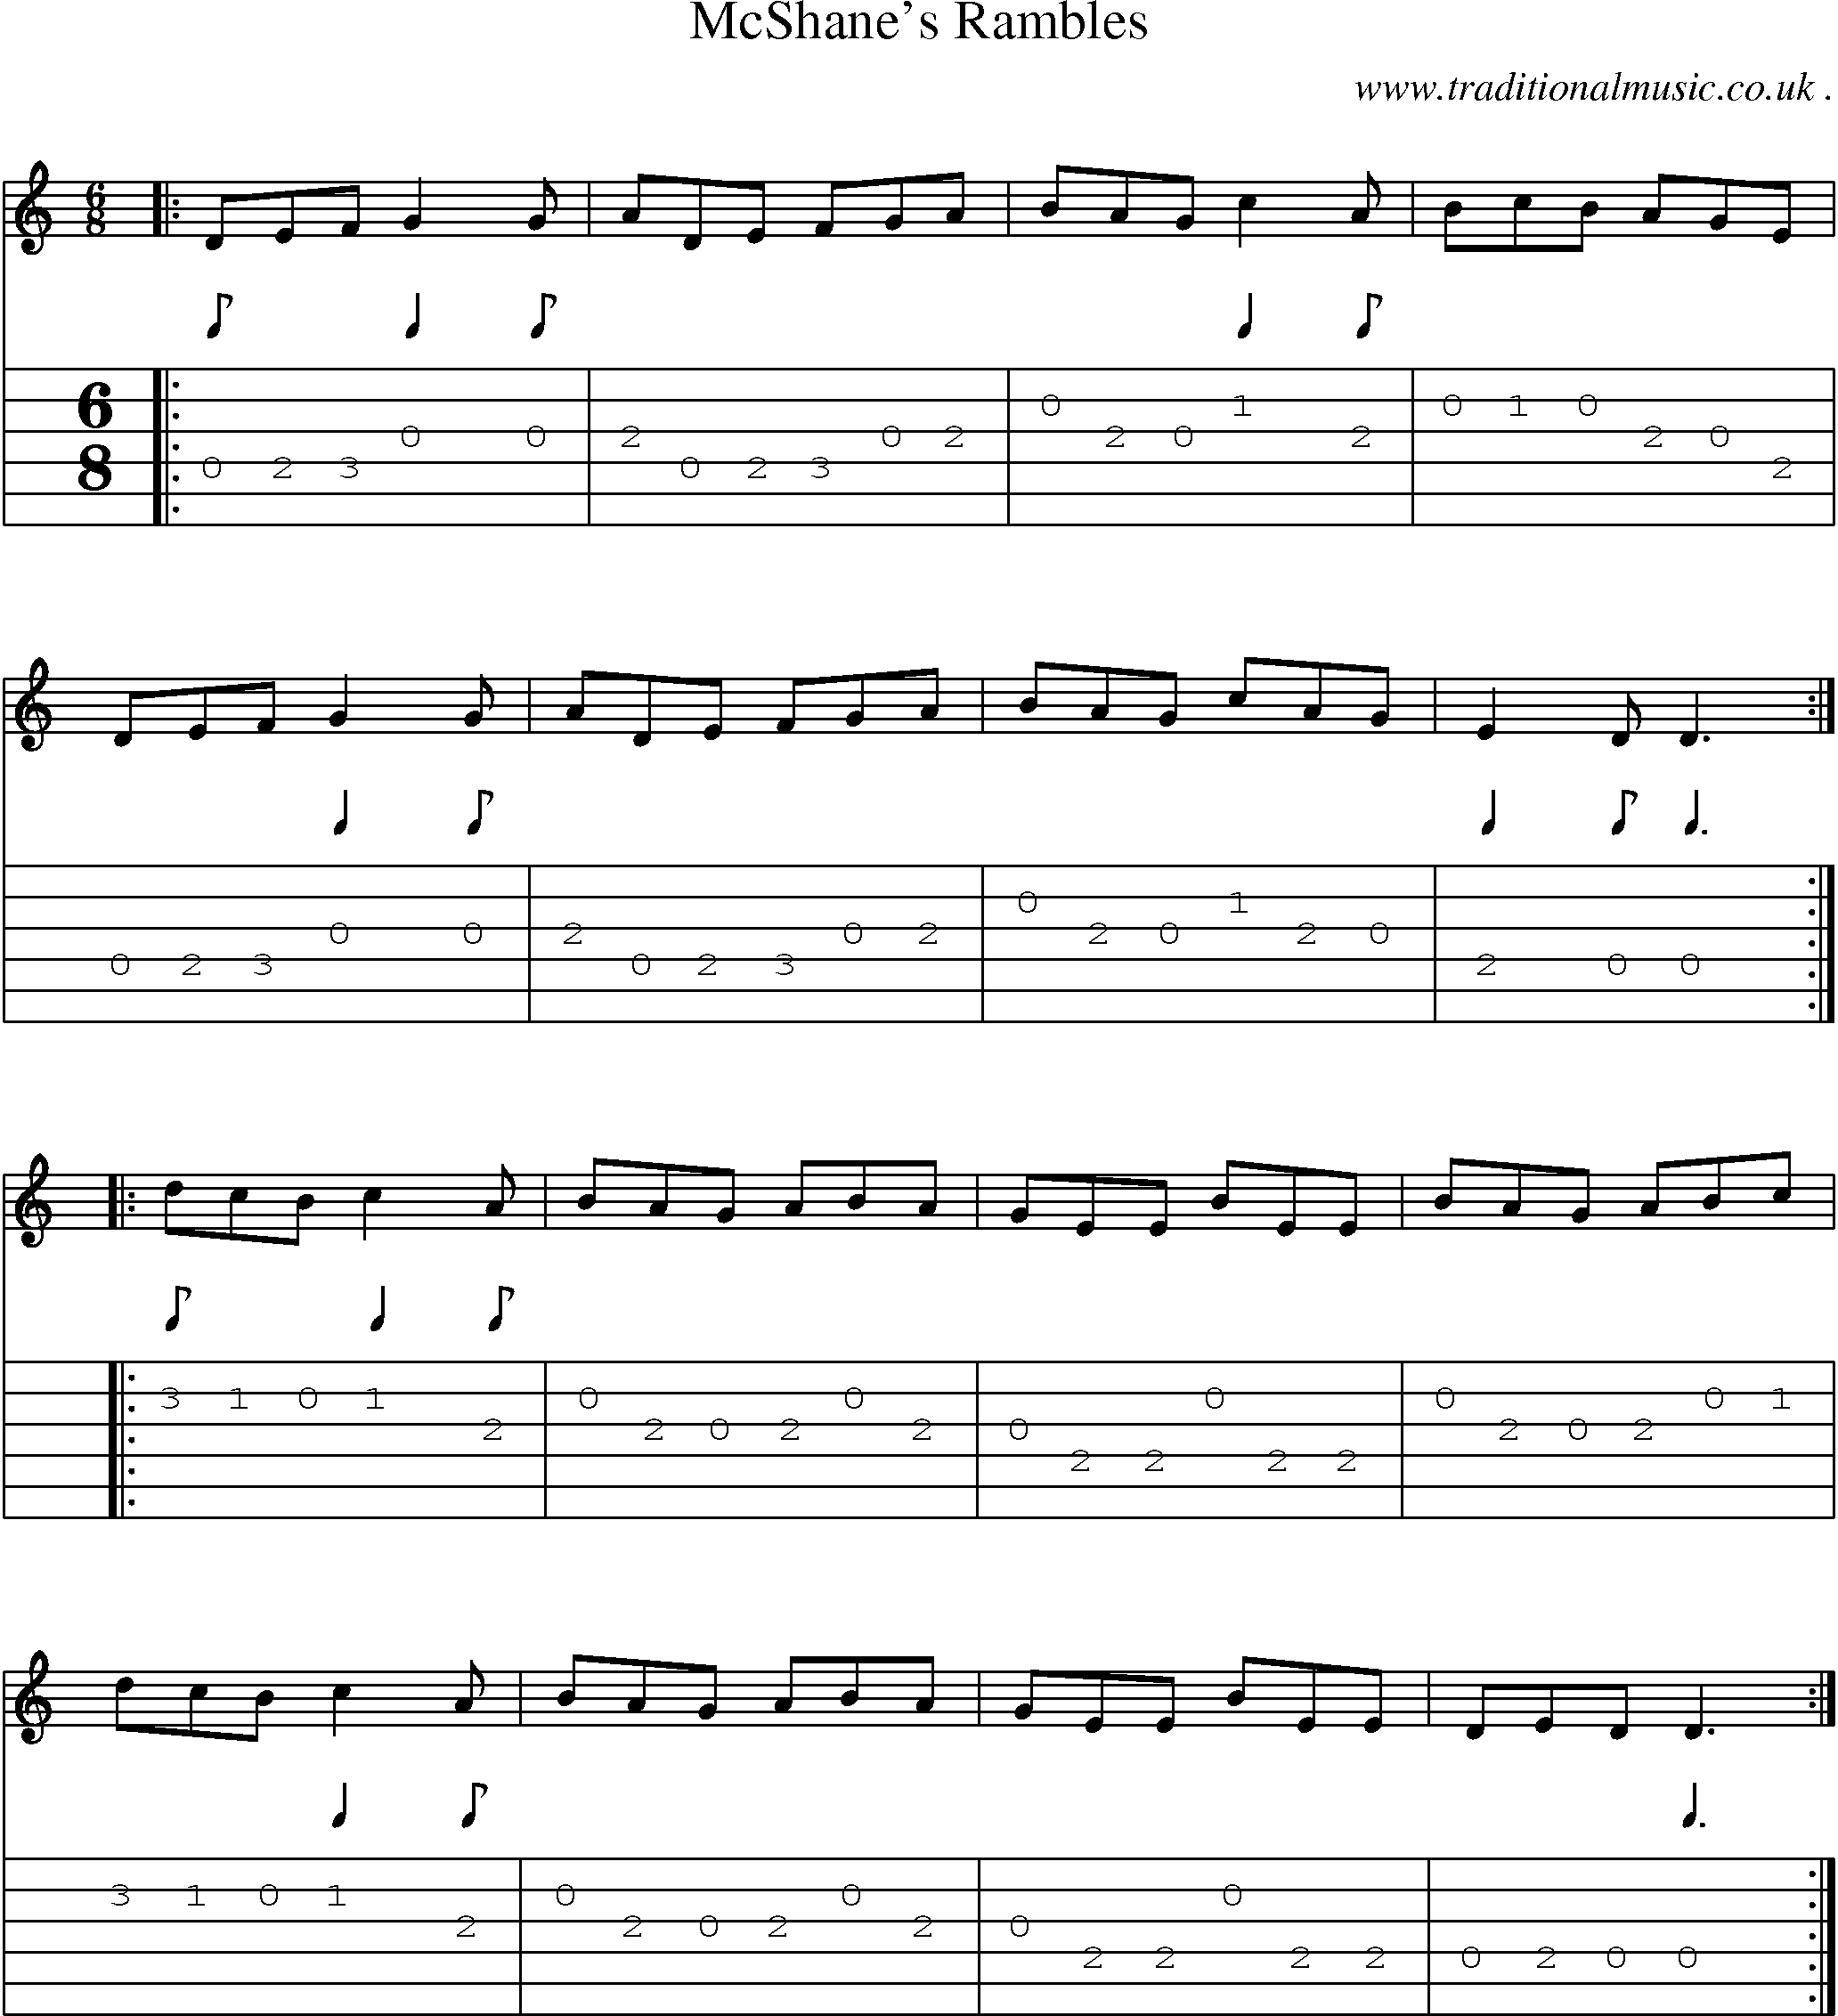 Sheet-Music and Guitar Tabs for Mcshanes Rambles